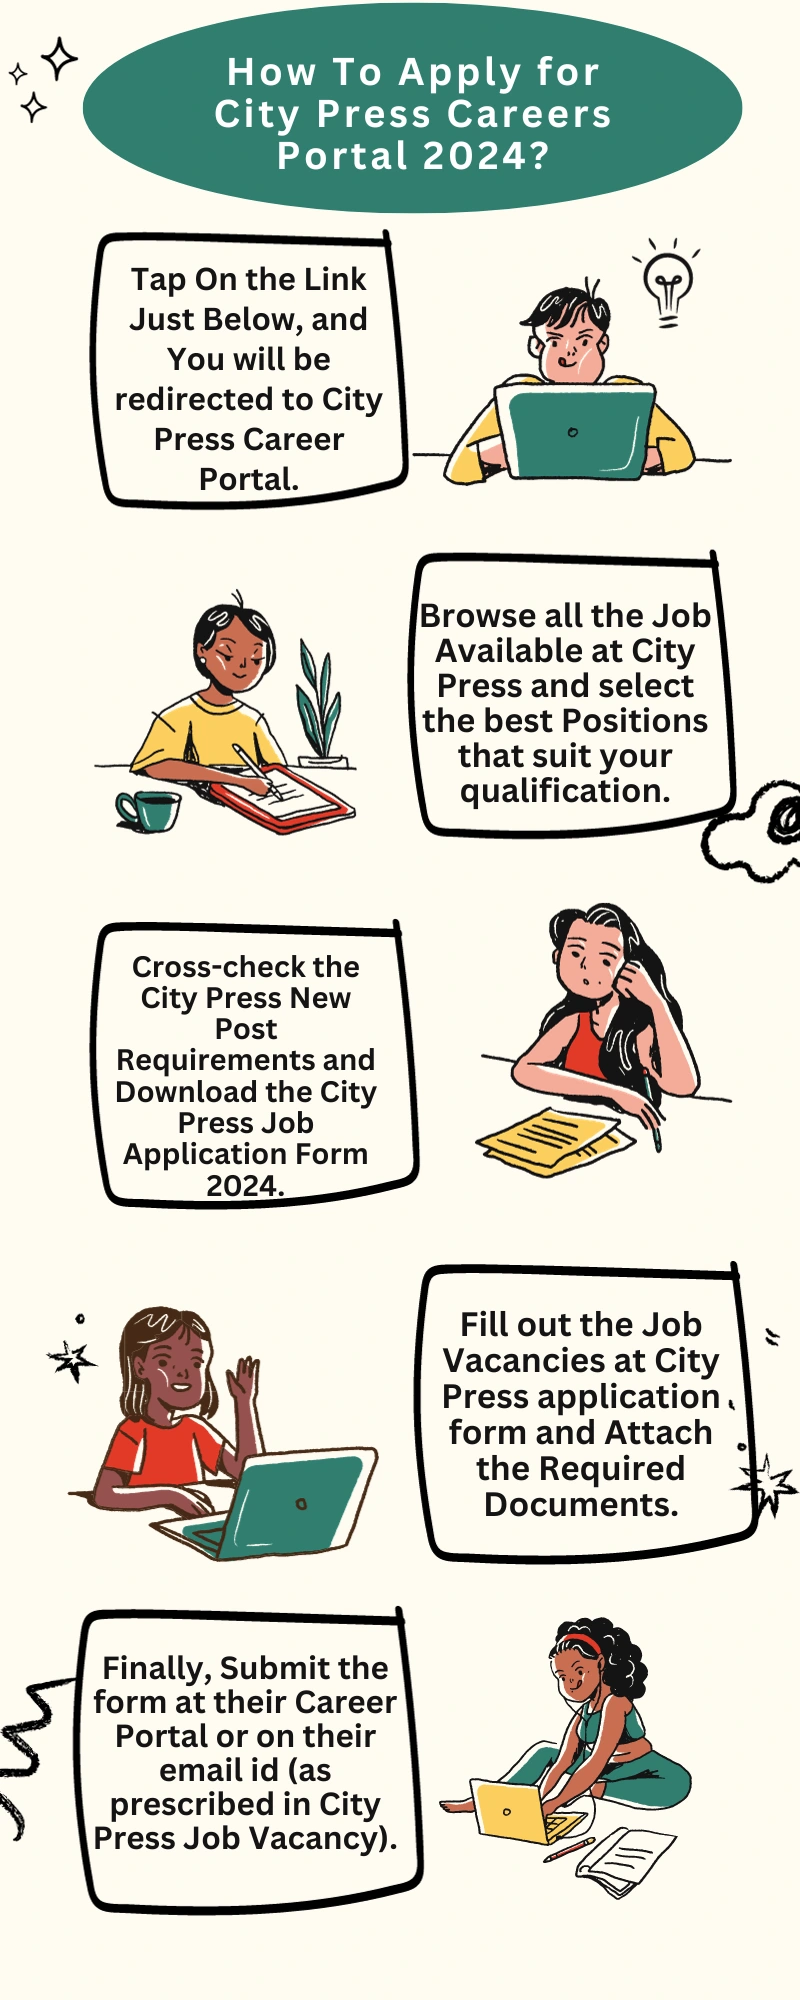 How To Apply for City Press Careers Portal 2024?